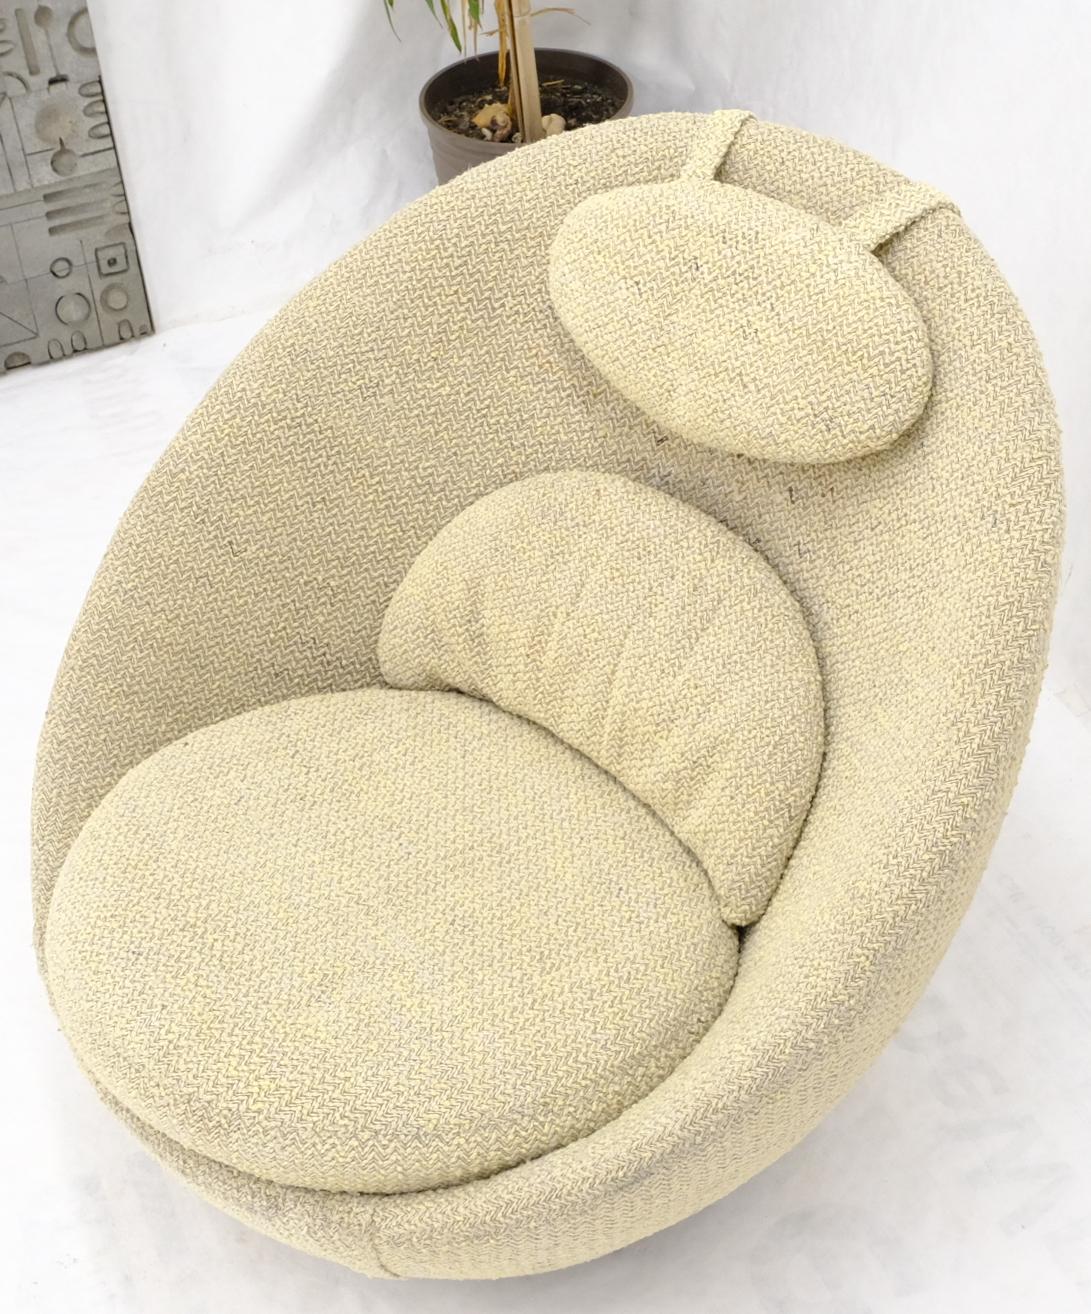 American Mid-Century Modern Oval Egg Shape Pod Chair w/ Adjustable Head Rest on Band Base For Sale